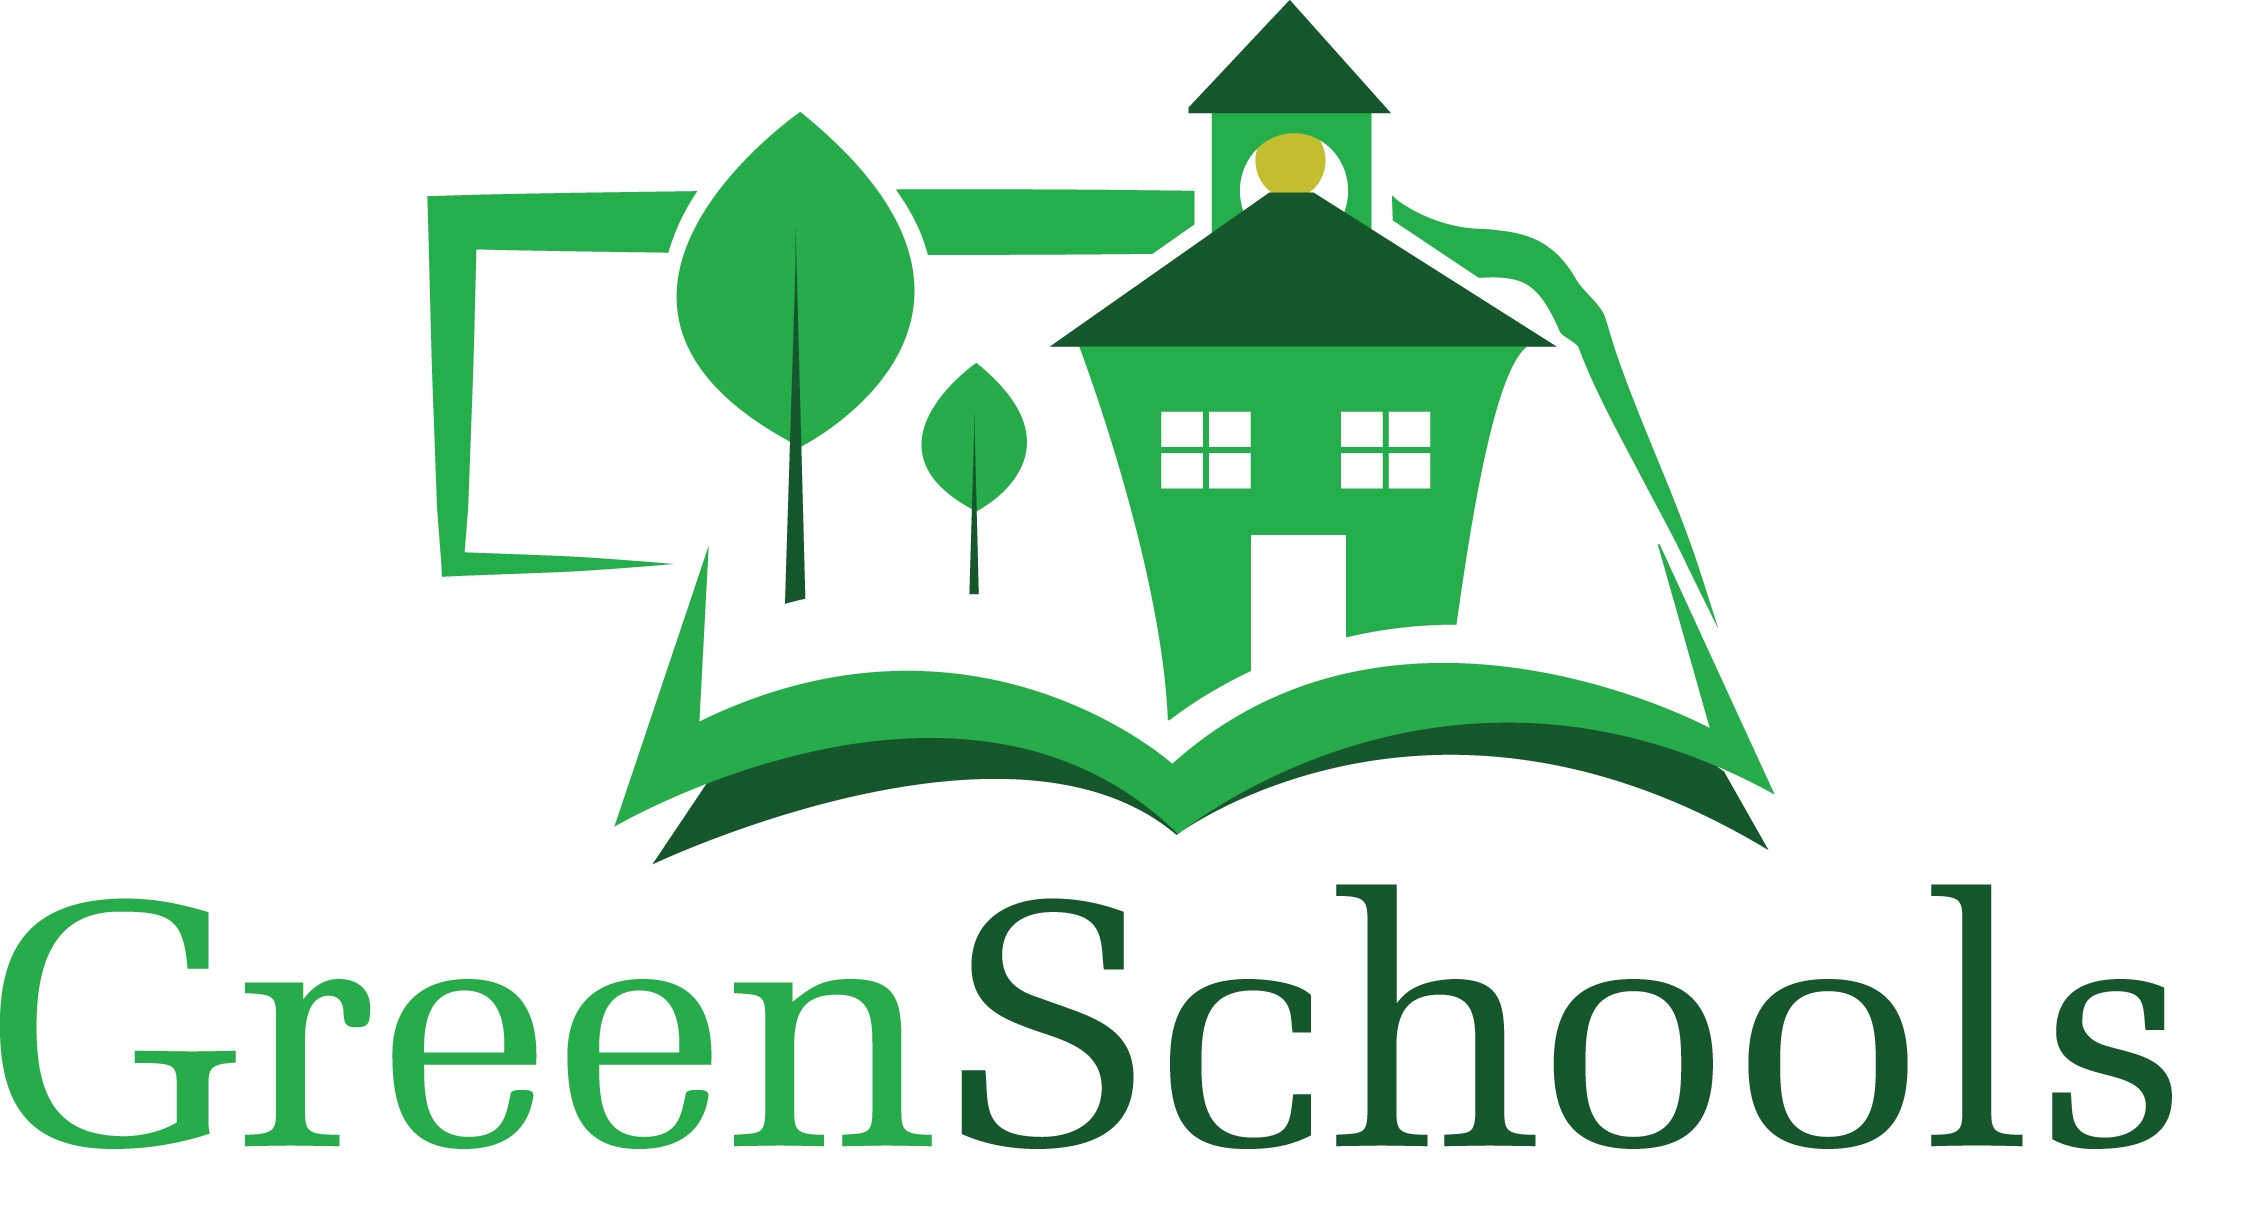 Charter for a Green School